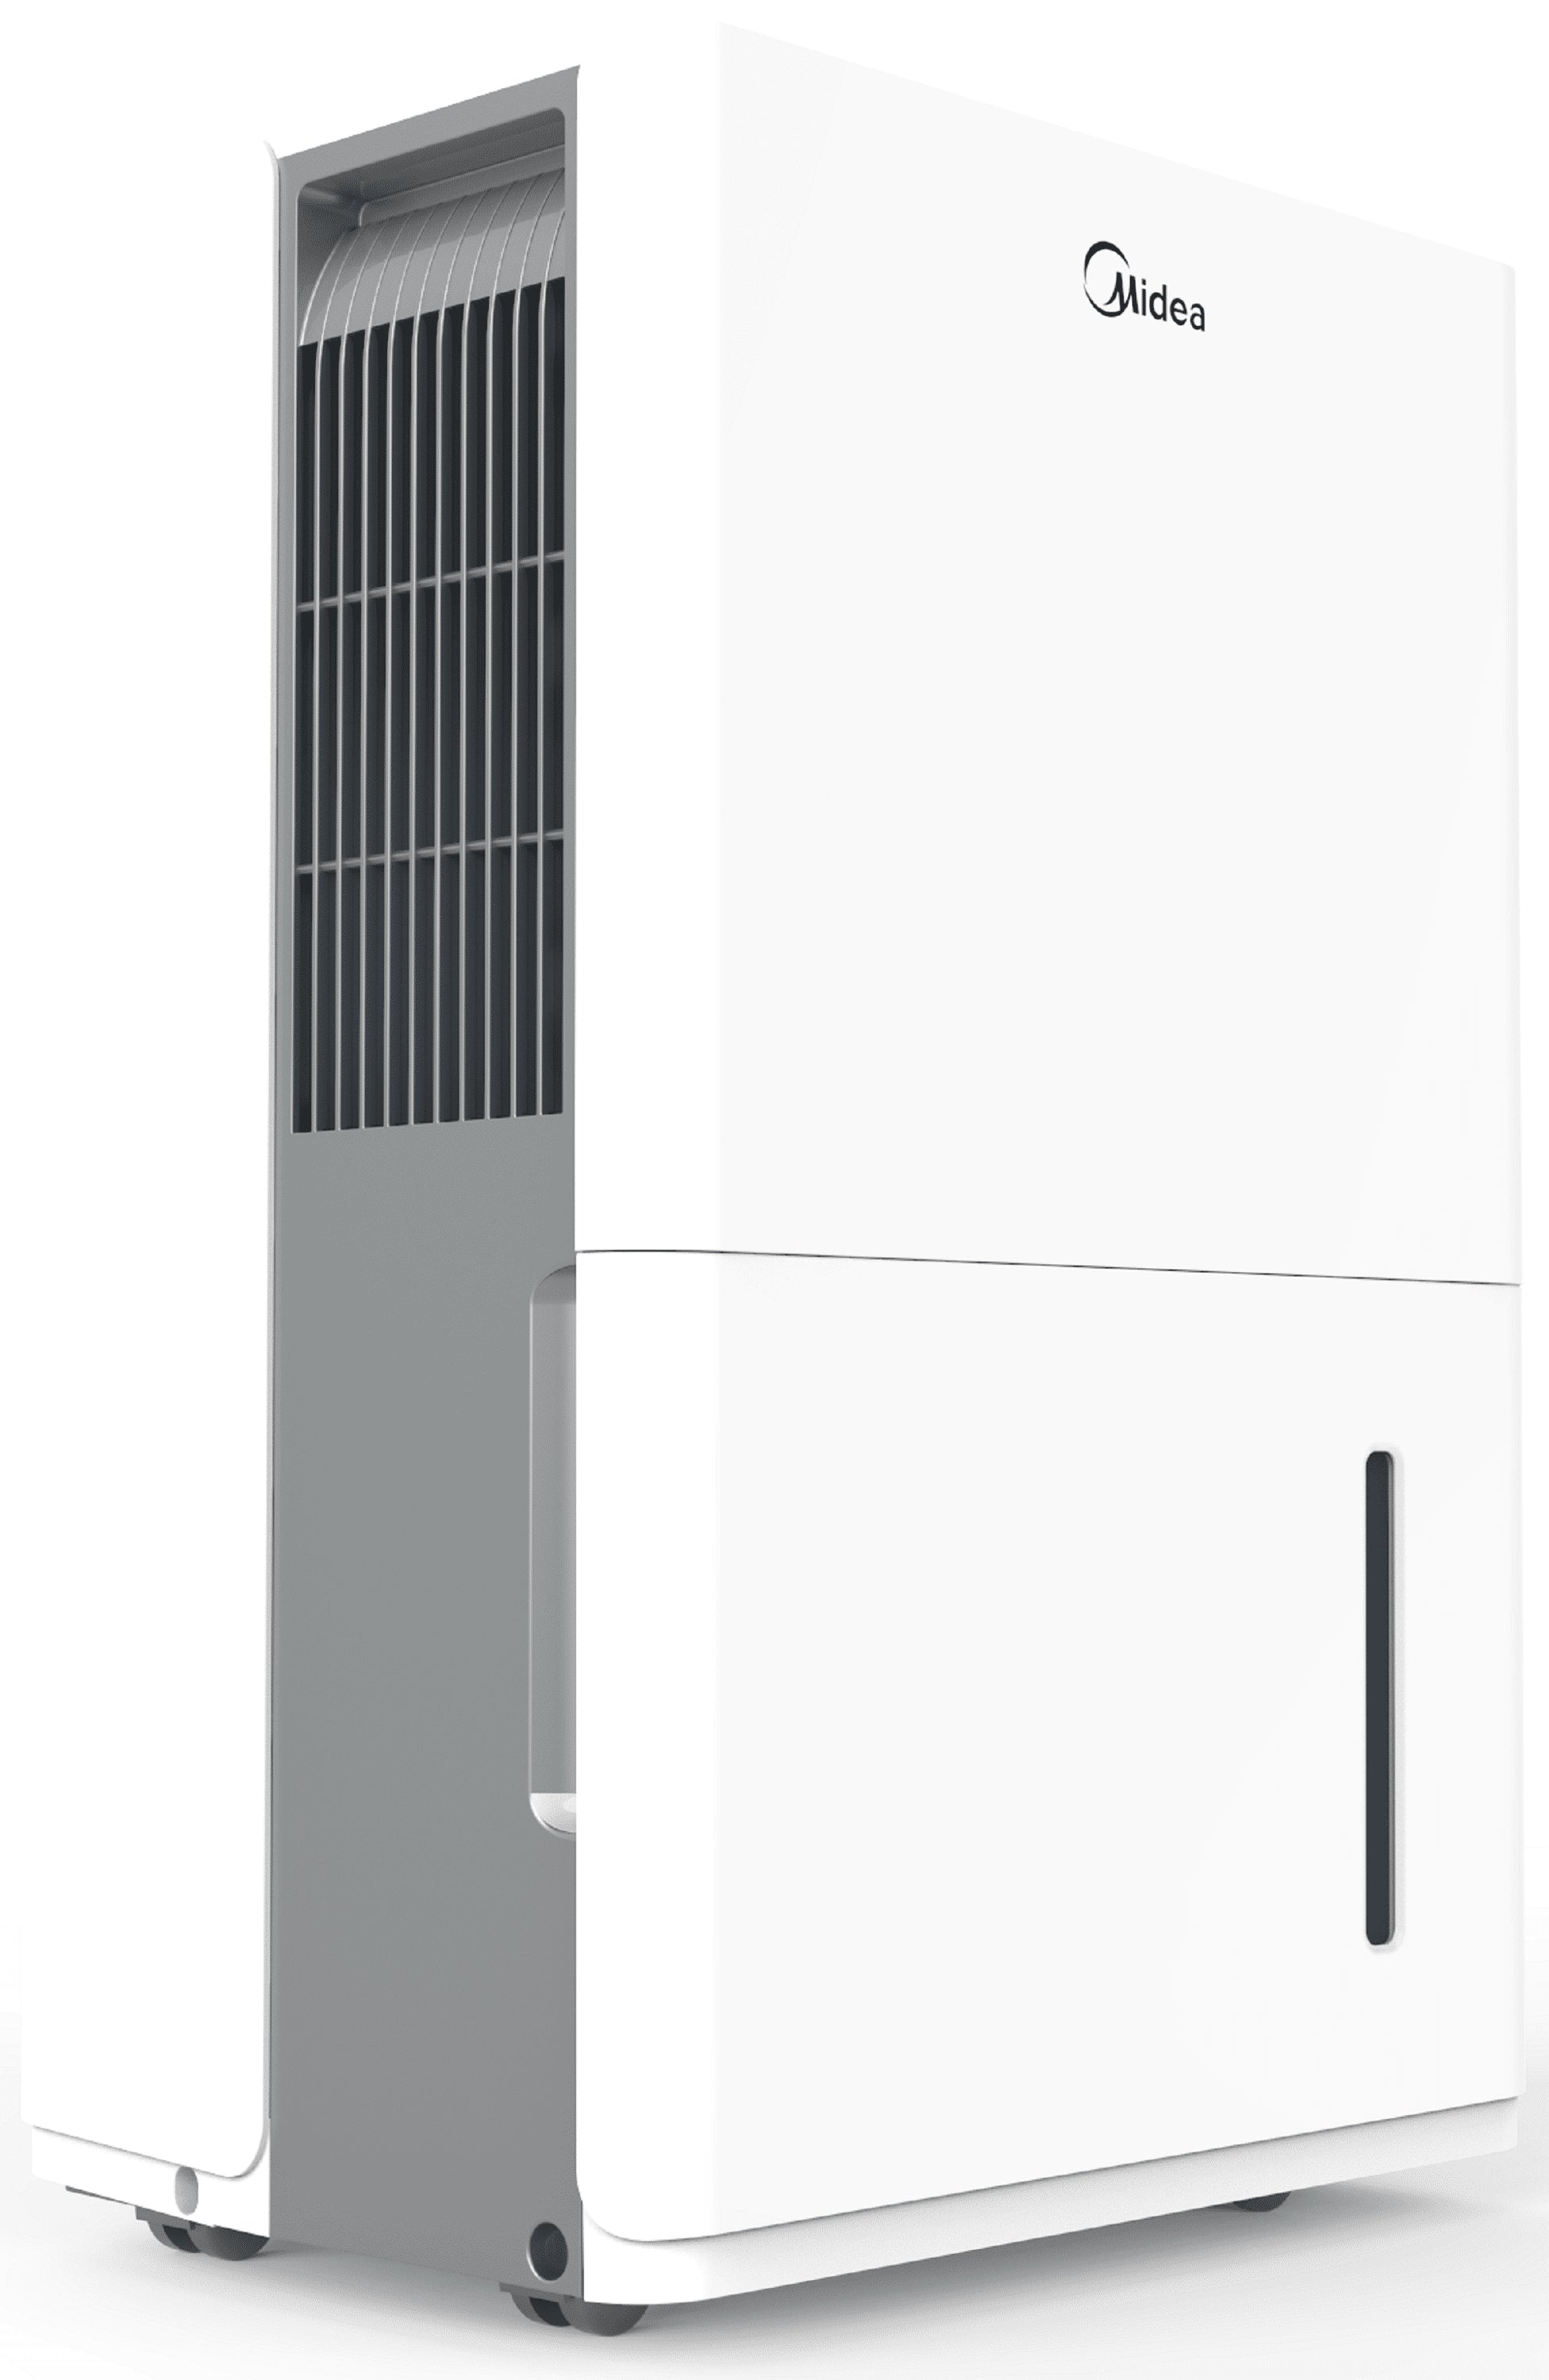 Restored Midea 22-Pint Energy Star Smart Dehumidifier for Damp Rooms, White, MAD22S1WWT (Factory Refurbished)